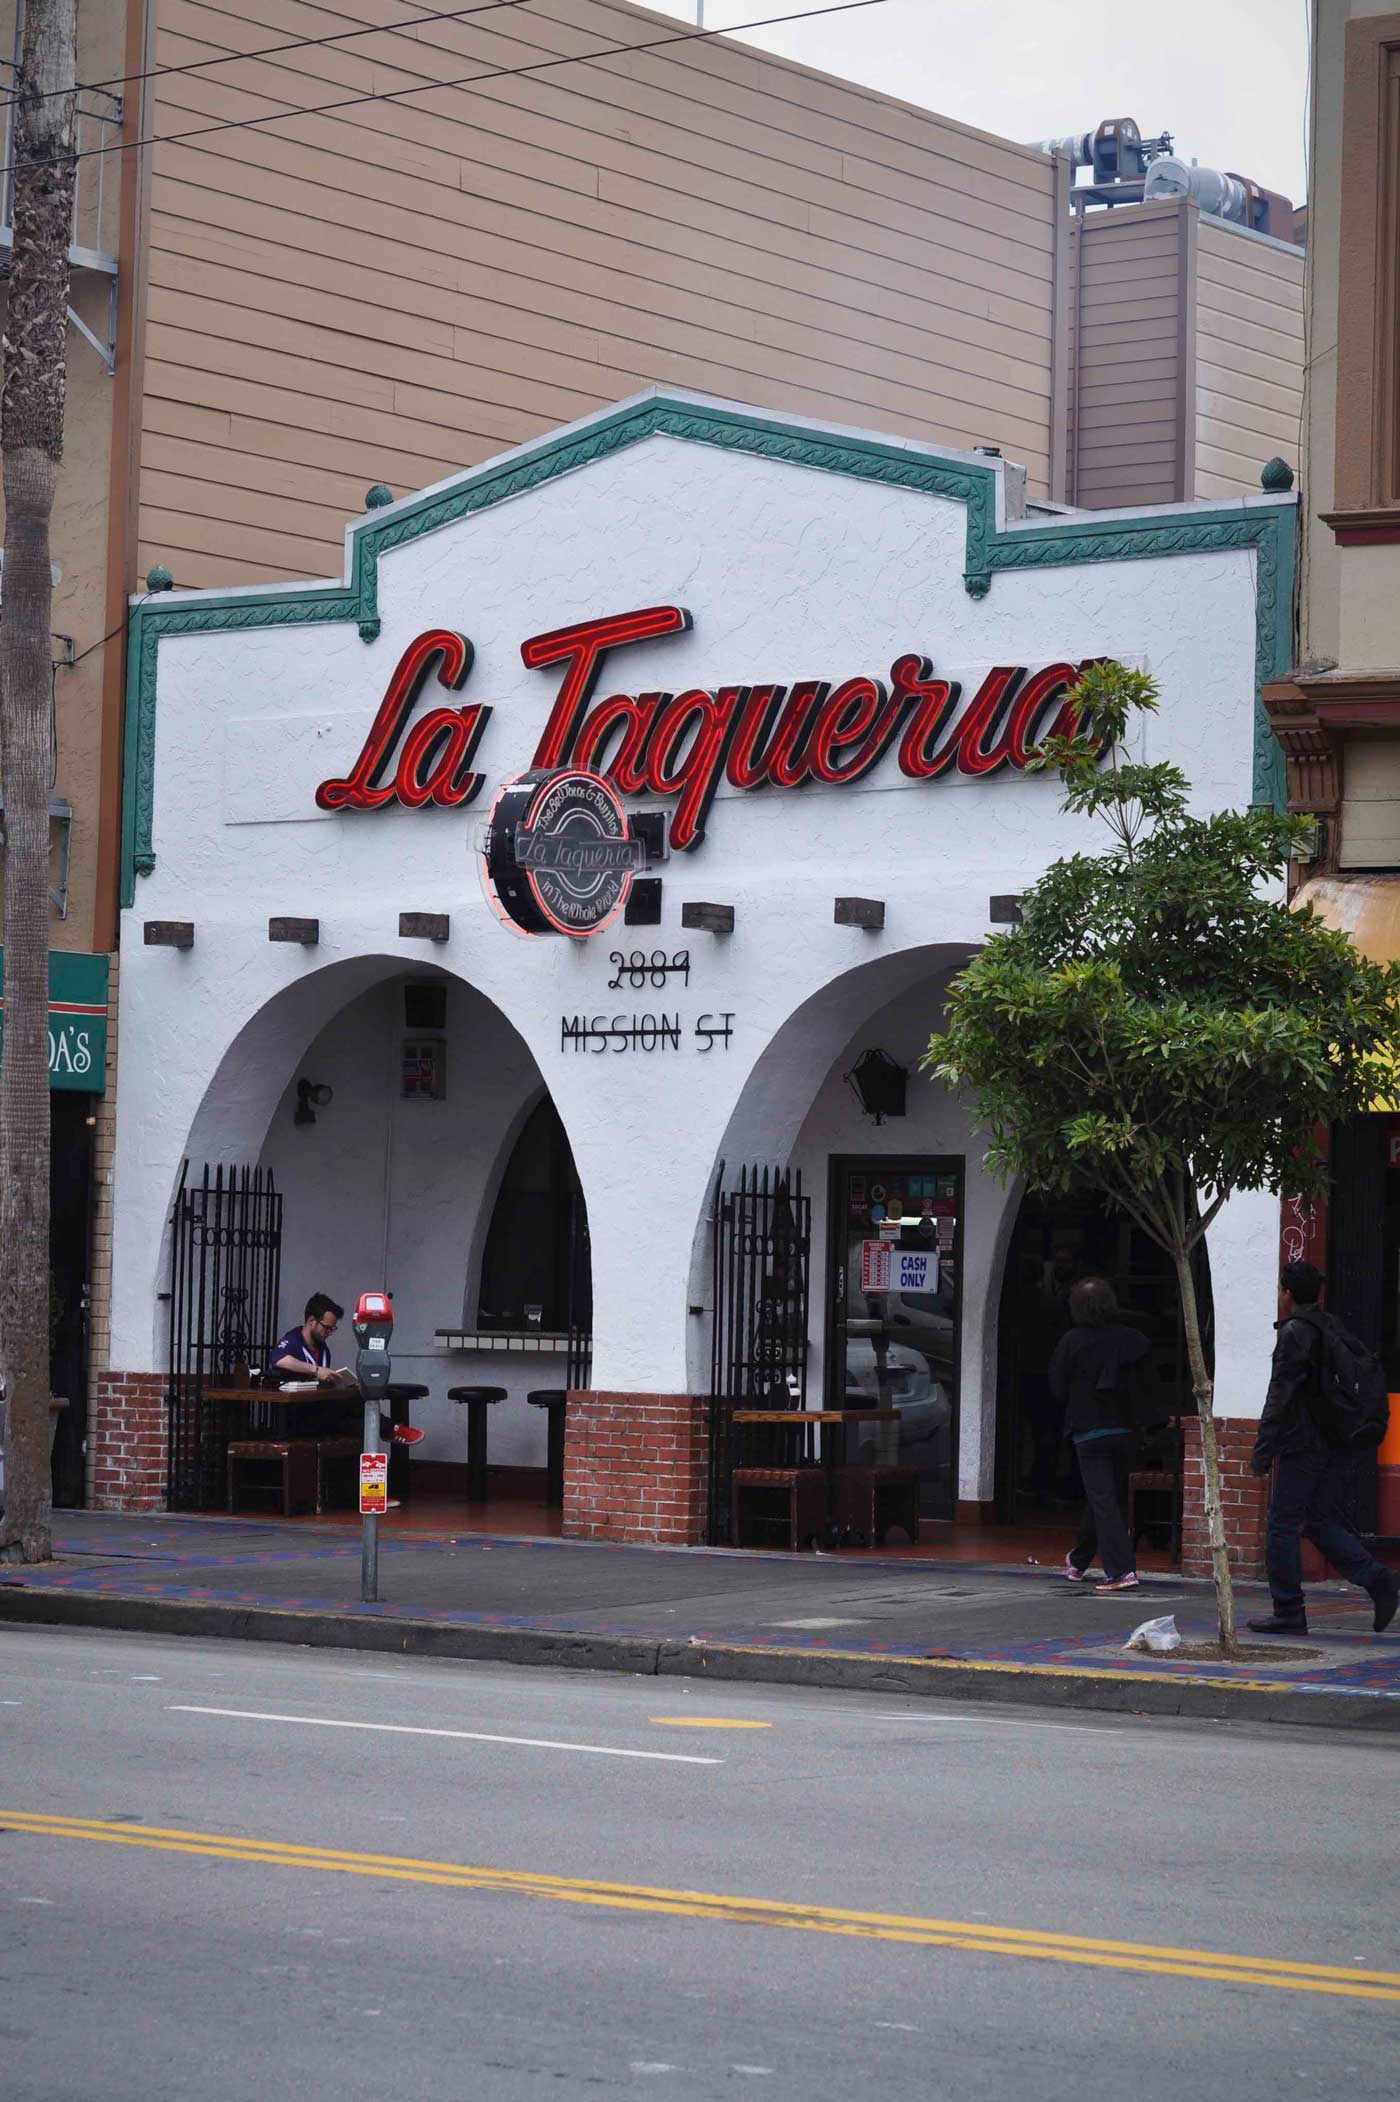 La Taqueria stands out on Mission Street